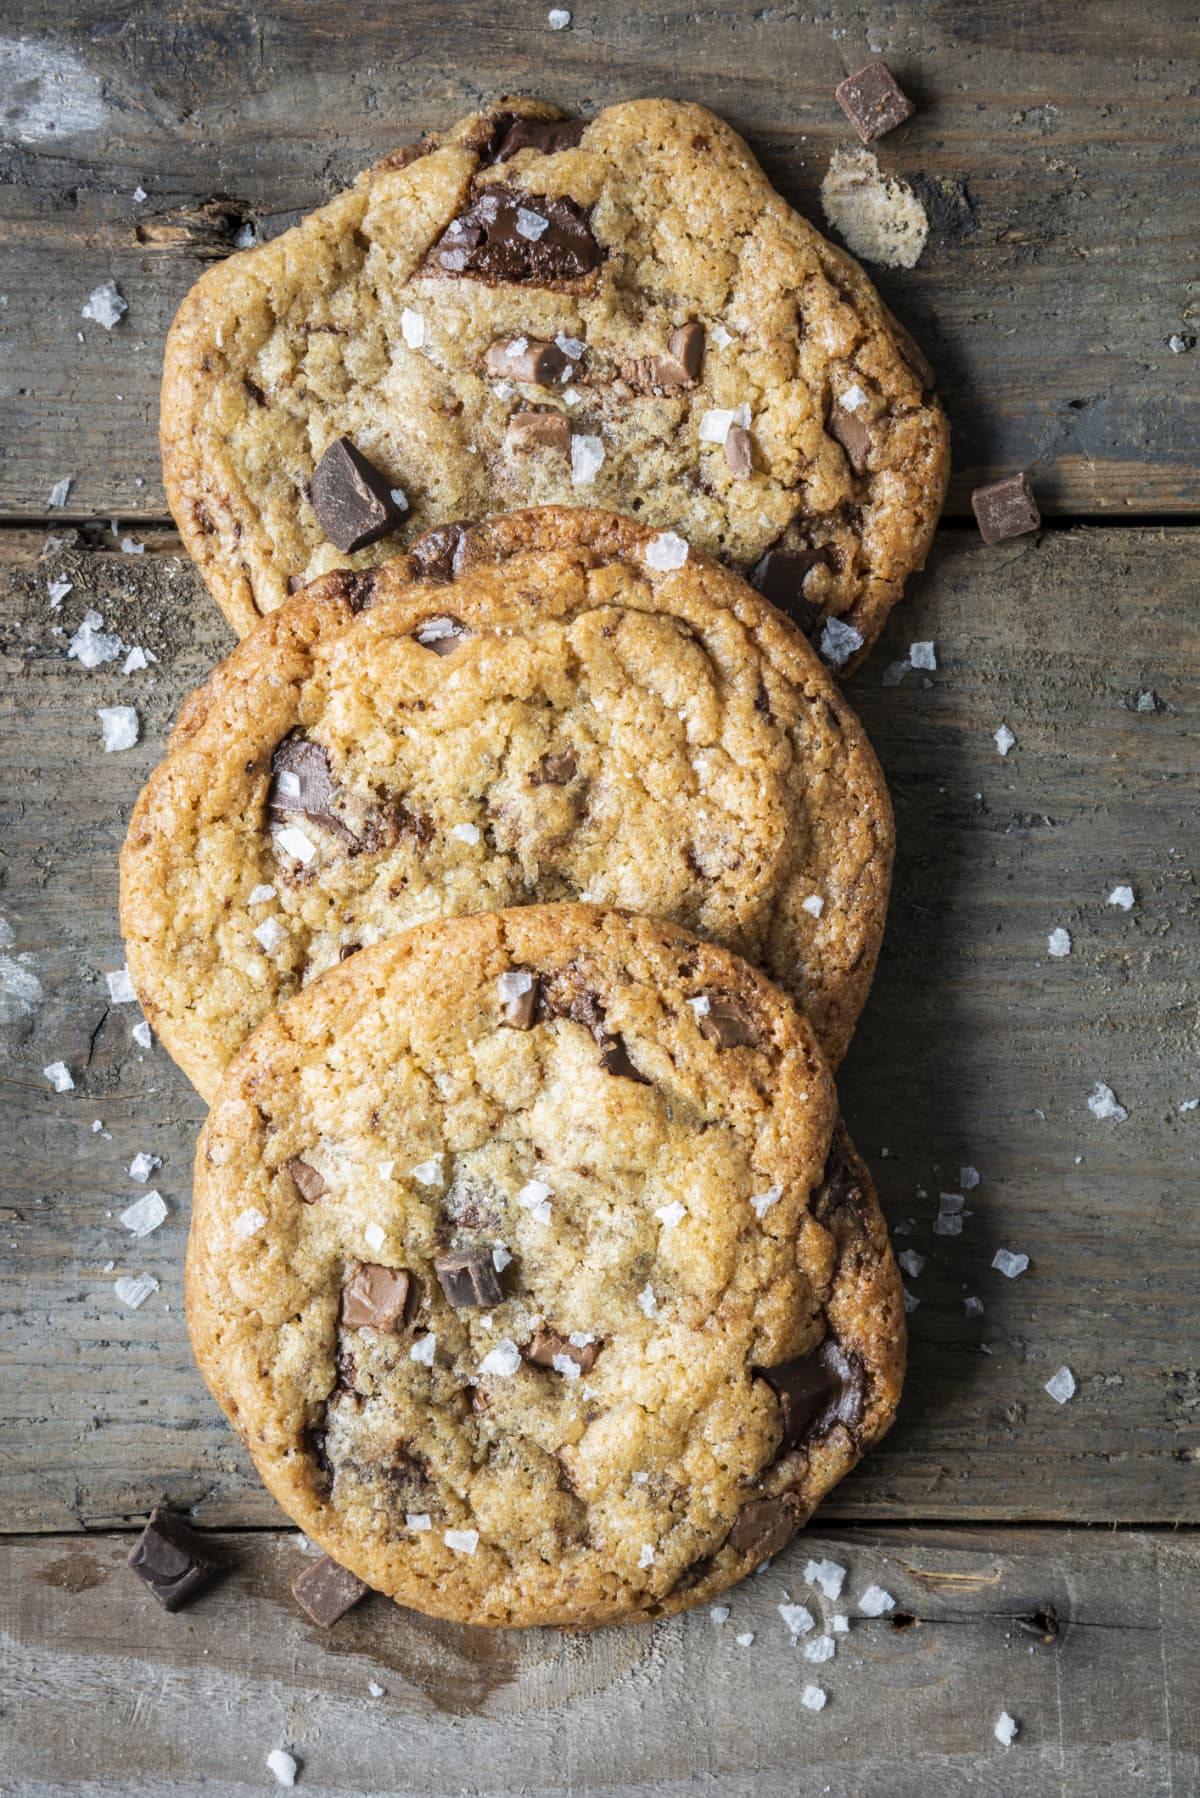 Three freshly baked chocolate chip cookies are lying on a textured wooden background sprinkled with salt. There are loose chocolate chips and salt flakes scattered around the cookies. The chocolate in the cookies has melted leaving the biscuits gooey. Taken from overhead.